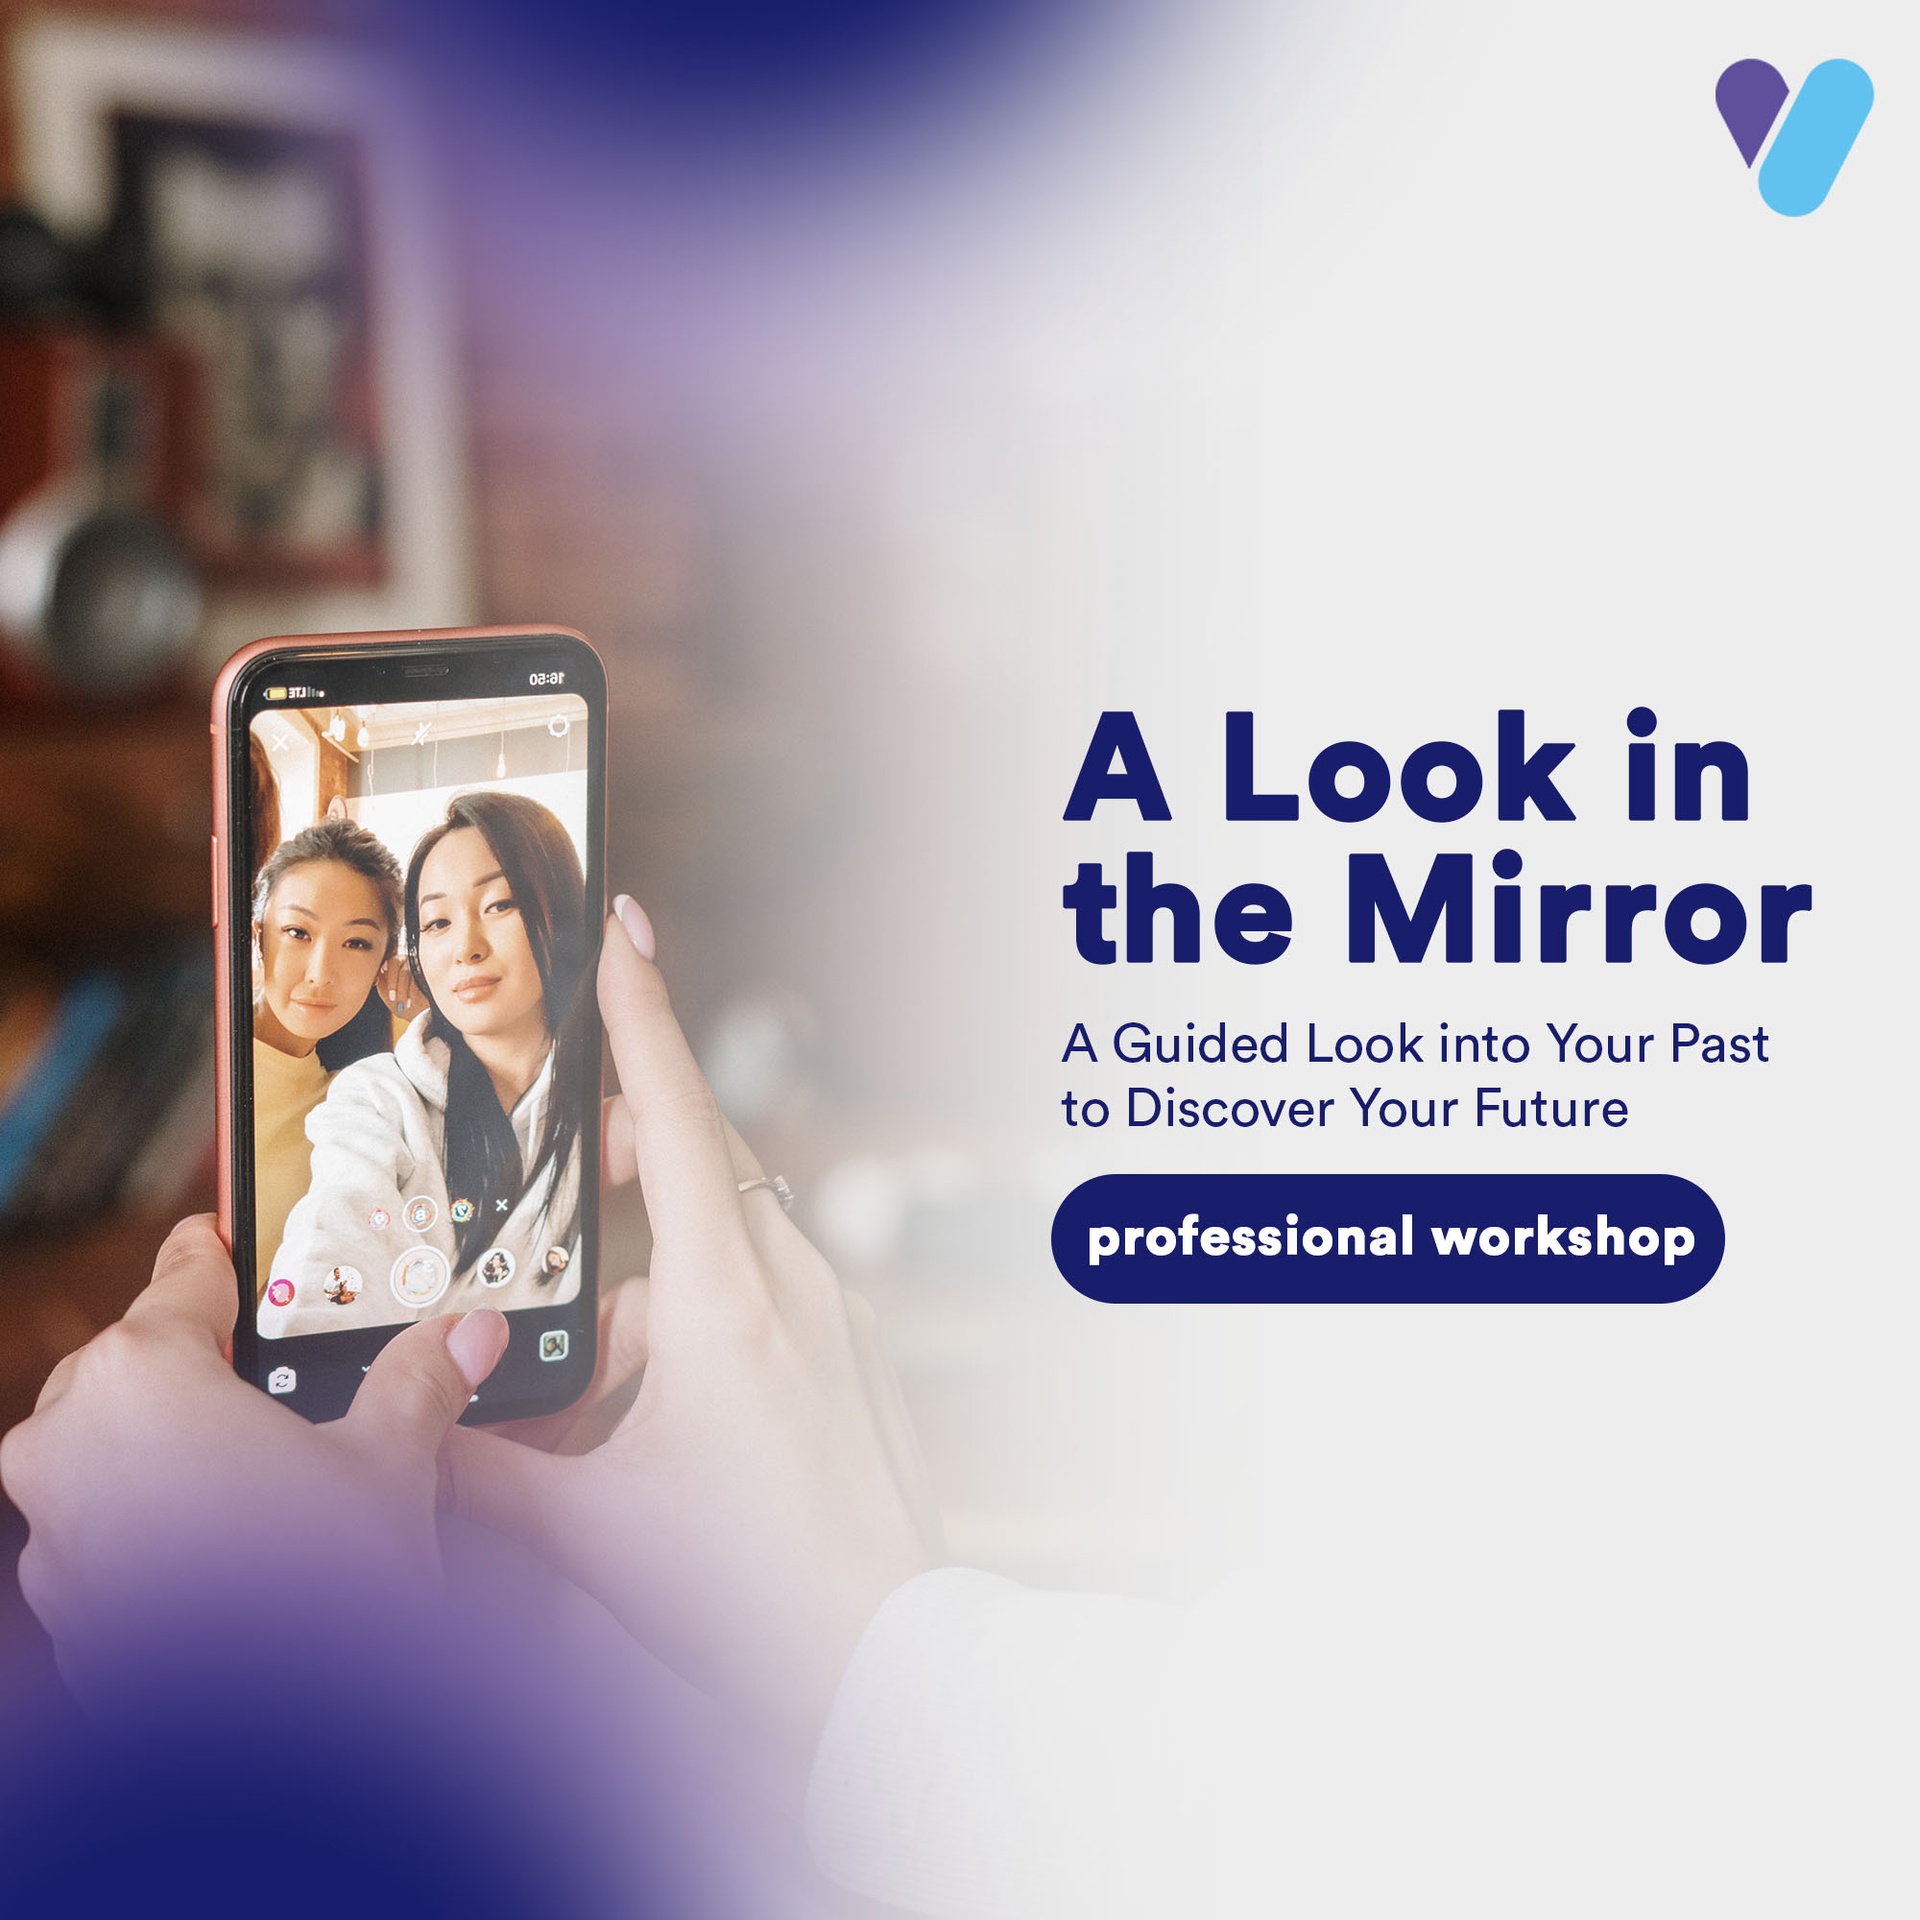 A Look in The Mirror: A Guided Look into Your Past to Discover Your Future